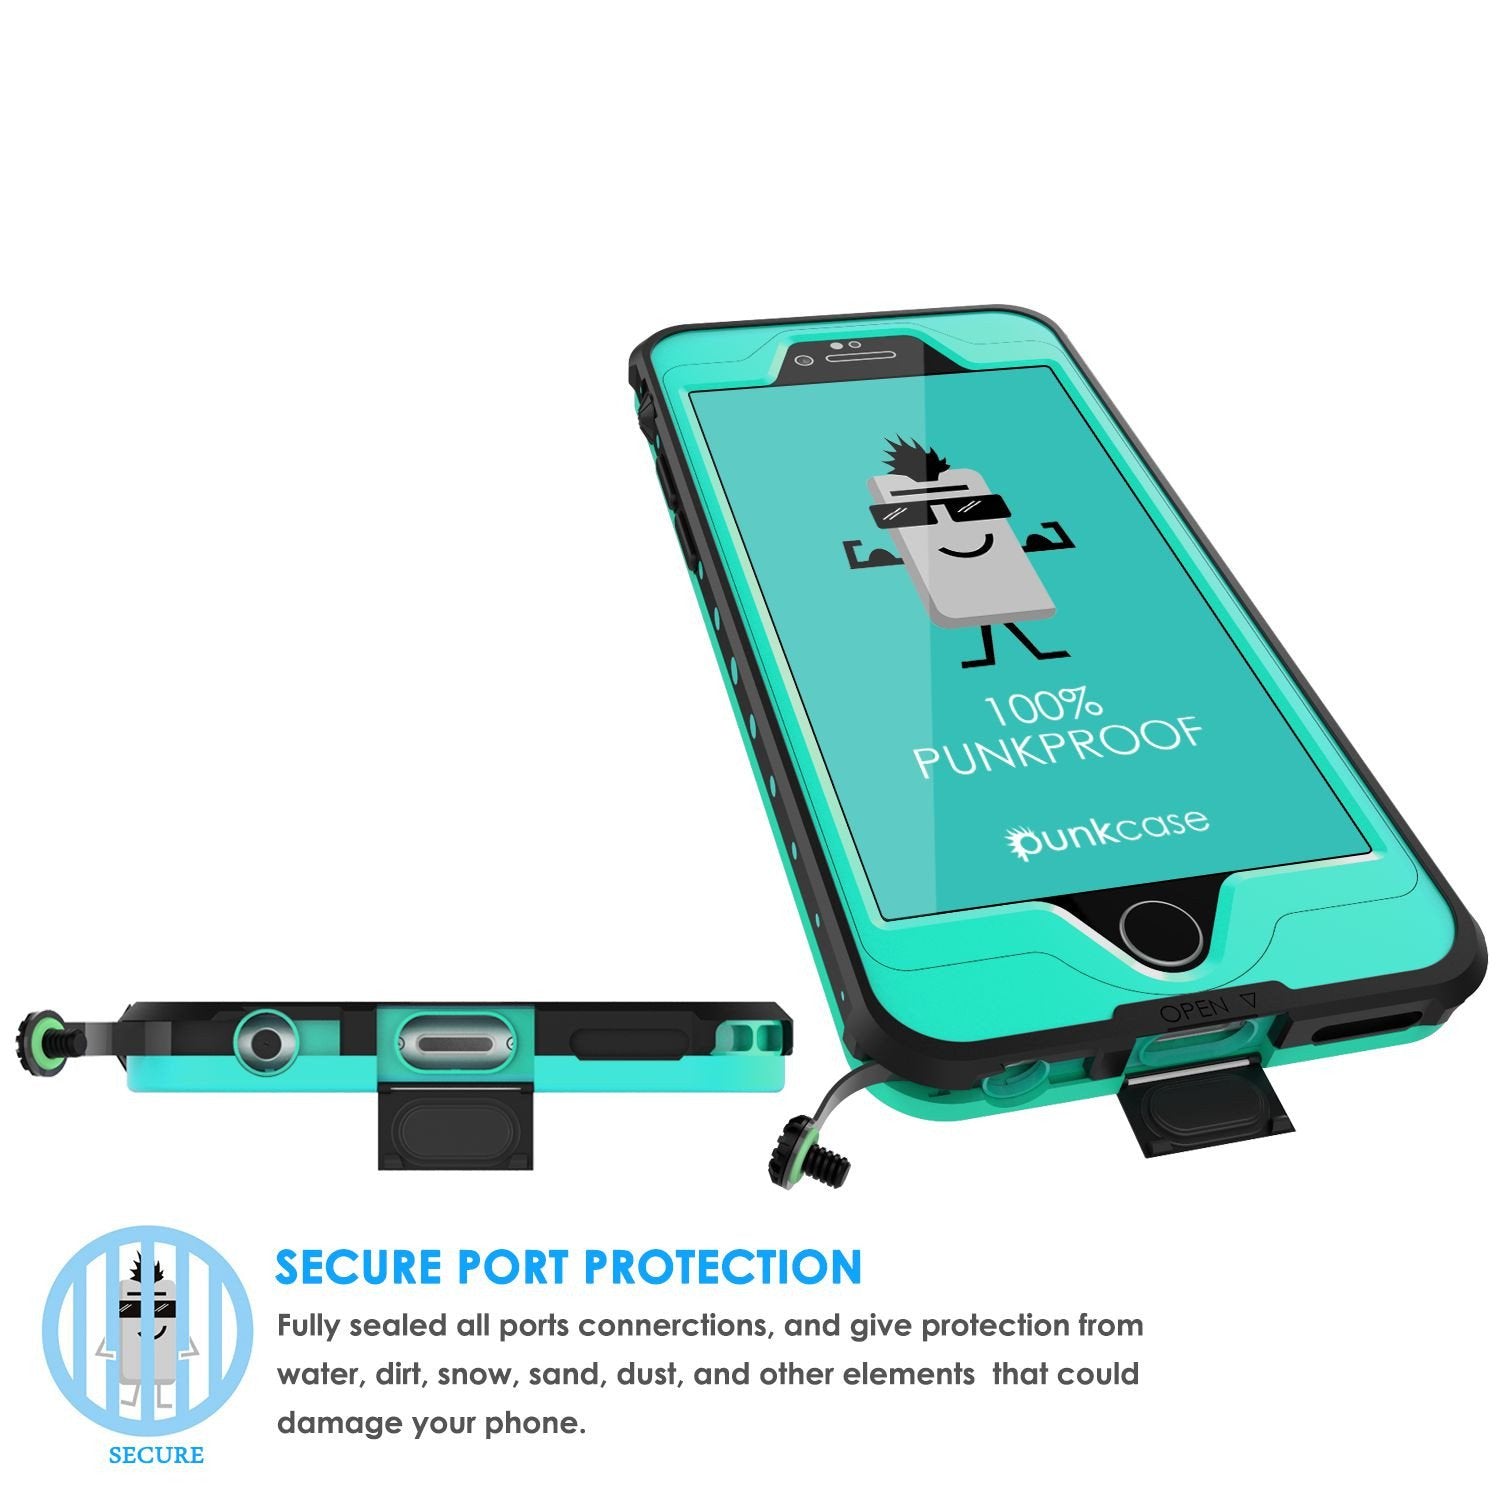 iPhone 6S+/6+ Plus Waterproof Case, PUNKcase StudStar Teal w/ Attached Screen Protector | Warranty